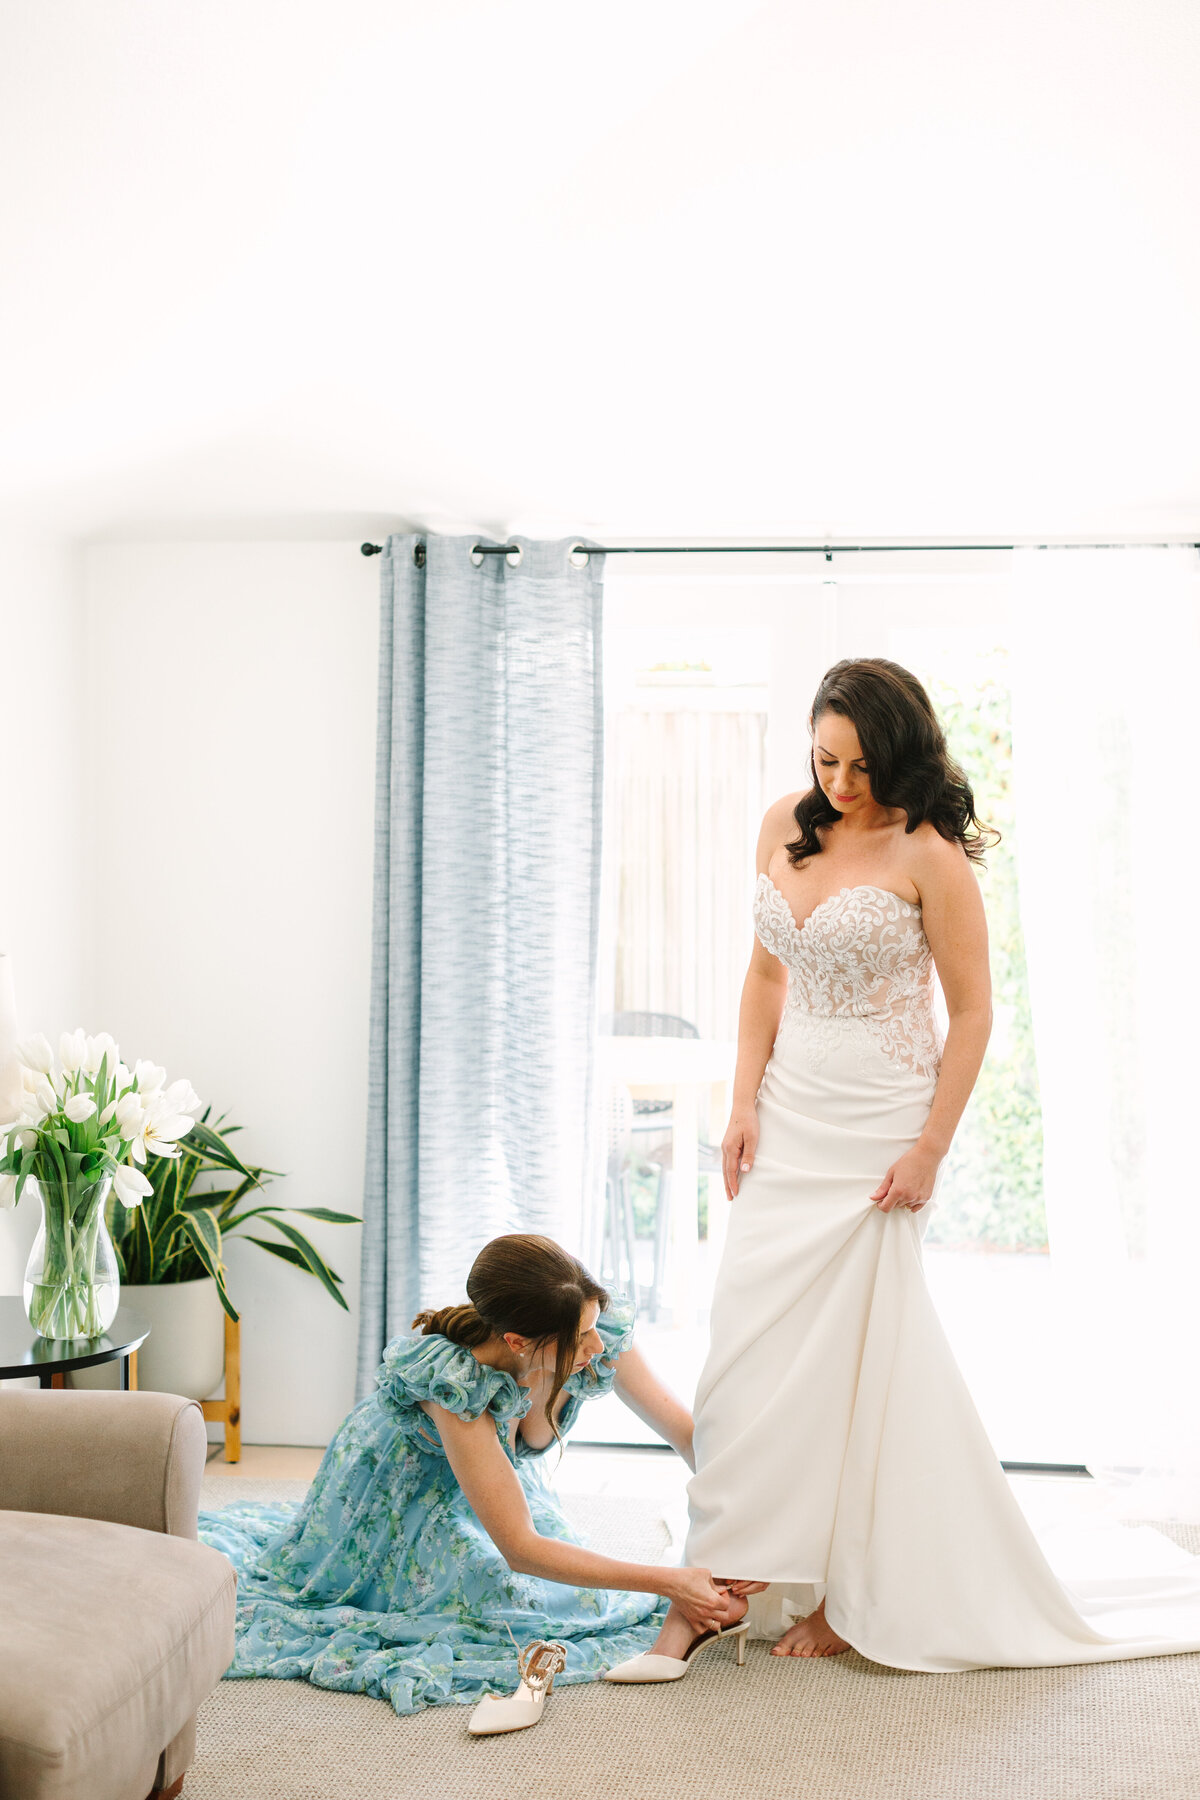 maid of honor helping bride put on shoes in a sunlit room before napa wedding ceremony.